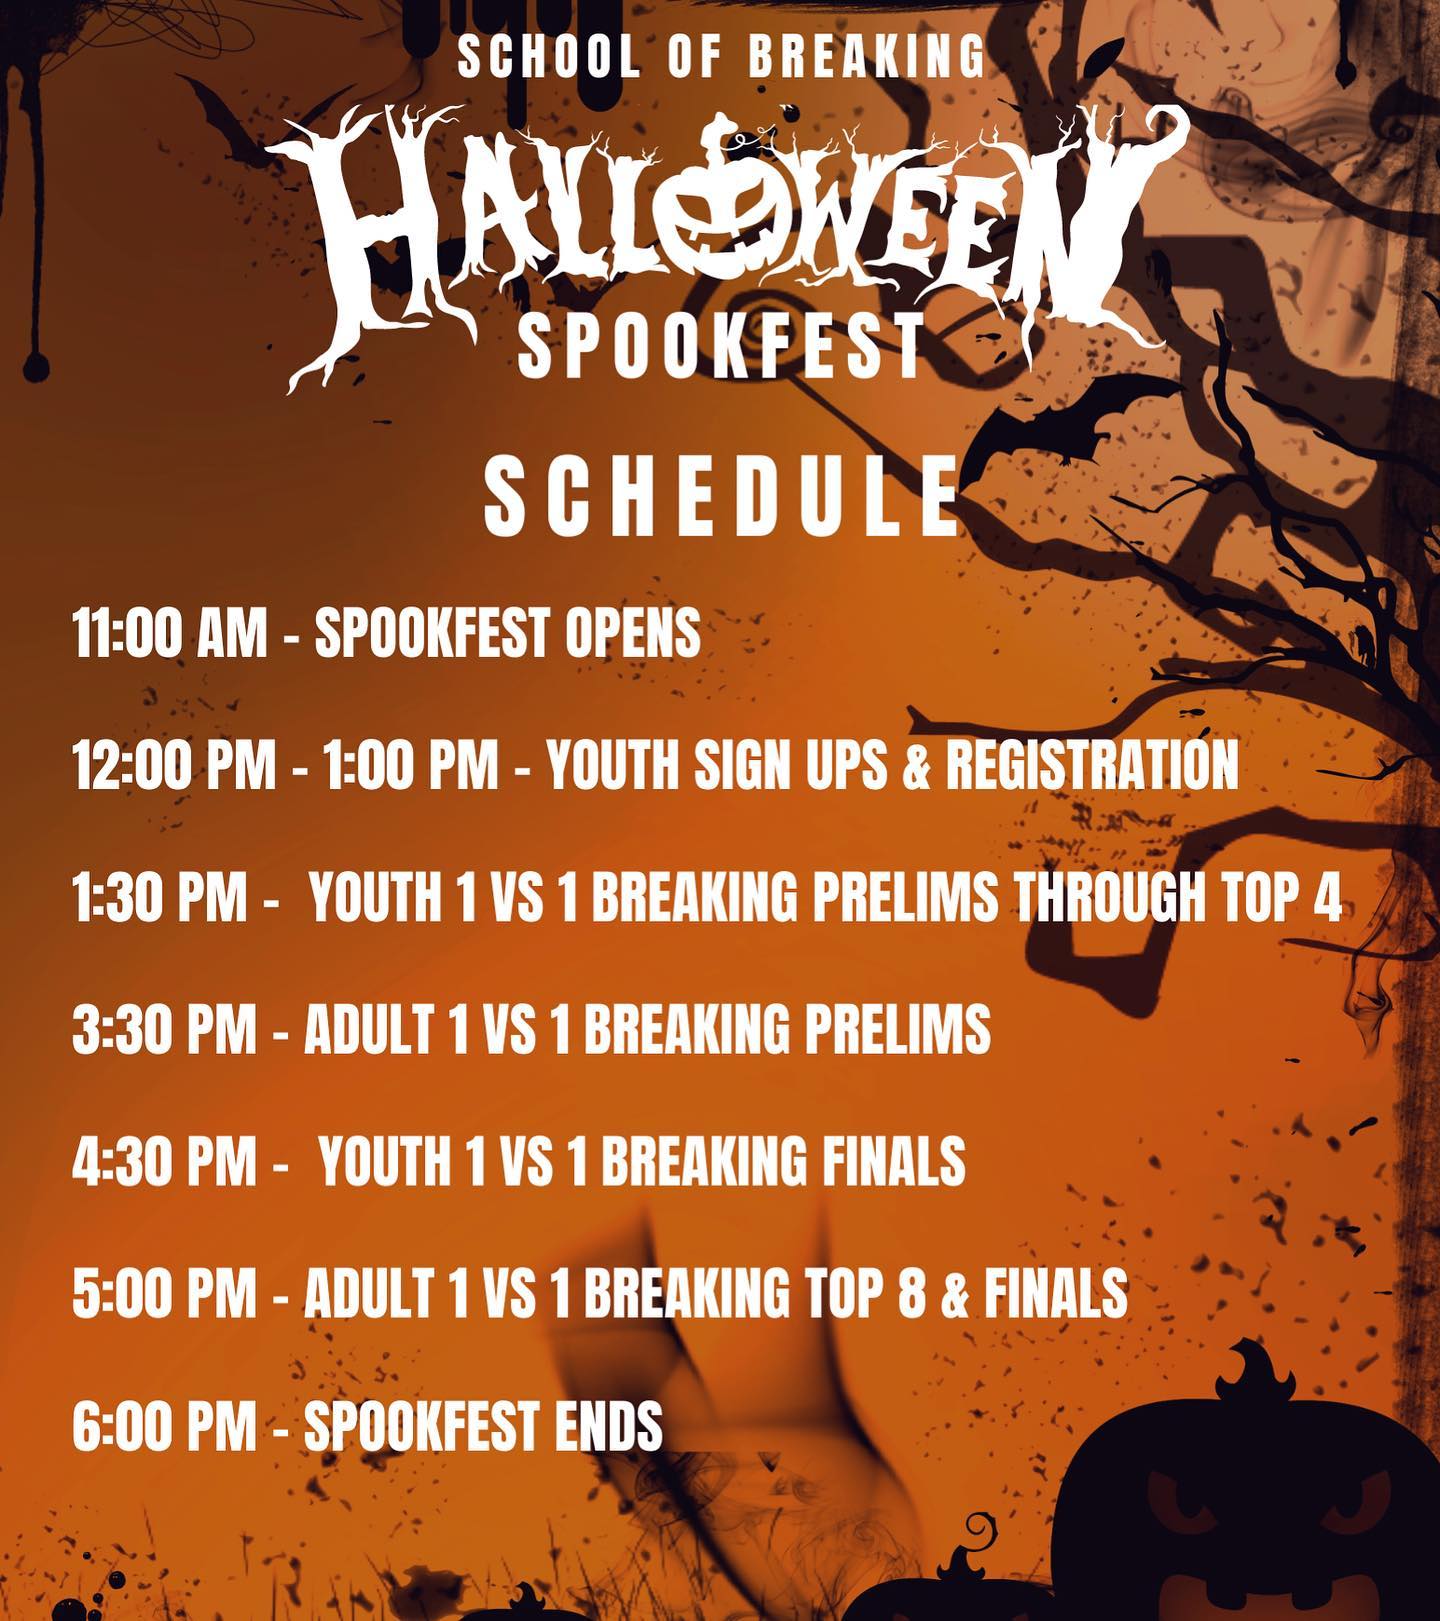 Today is the day who is ready to have a spooky good time 👻🎃

Check the schedule to plan accordingly, looking forward to celebrating this Halloween weekend with everyone. Let’s get spooky 😱

come Battle it out in your costume 🦹🏼‍♀️

💥1 vs 1 Youth Breaking 14 & under Breaking (Hosted by @scrappybreakers)
💥Haunted house 
💥Trunk - O - Treat 

💥Adult 1 vs 1 Breaking 
💥Halloween costume contest

💥Judges - @gustavoavelar27 @sunraw_tfs @bobbybrownrice 

💥DJ - @aceonemusic 

This year we will have a spooky haunted house and a Trunk-Or-Treat 🍭🎃 And we couldn’t have a Halloween jam without a costume contest 🧛🏾‍♂️🧙‍♀️

Admission 
$15 per person
$12 (SOB members) 
Children 6 & Under Free with paying Adult

#schoolofbreaking #halloween #jam #spookfest #youth #breaking #battles #bboy #bgirl #lifestyle #hiphop #streetdance #culture #expressfreely #peace #love #unity #havingfun